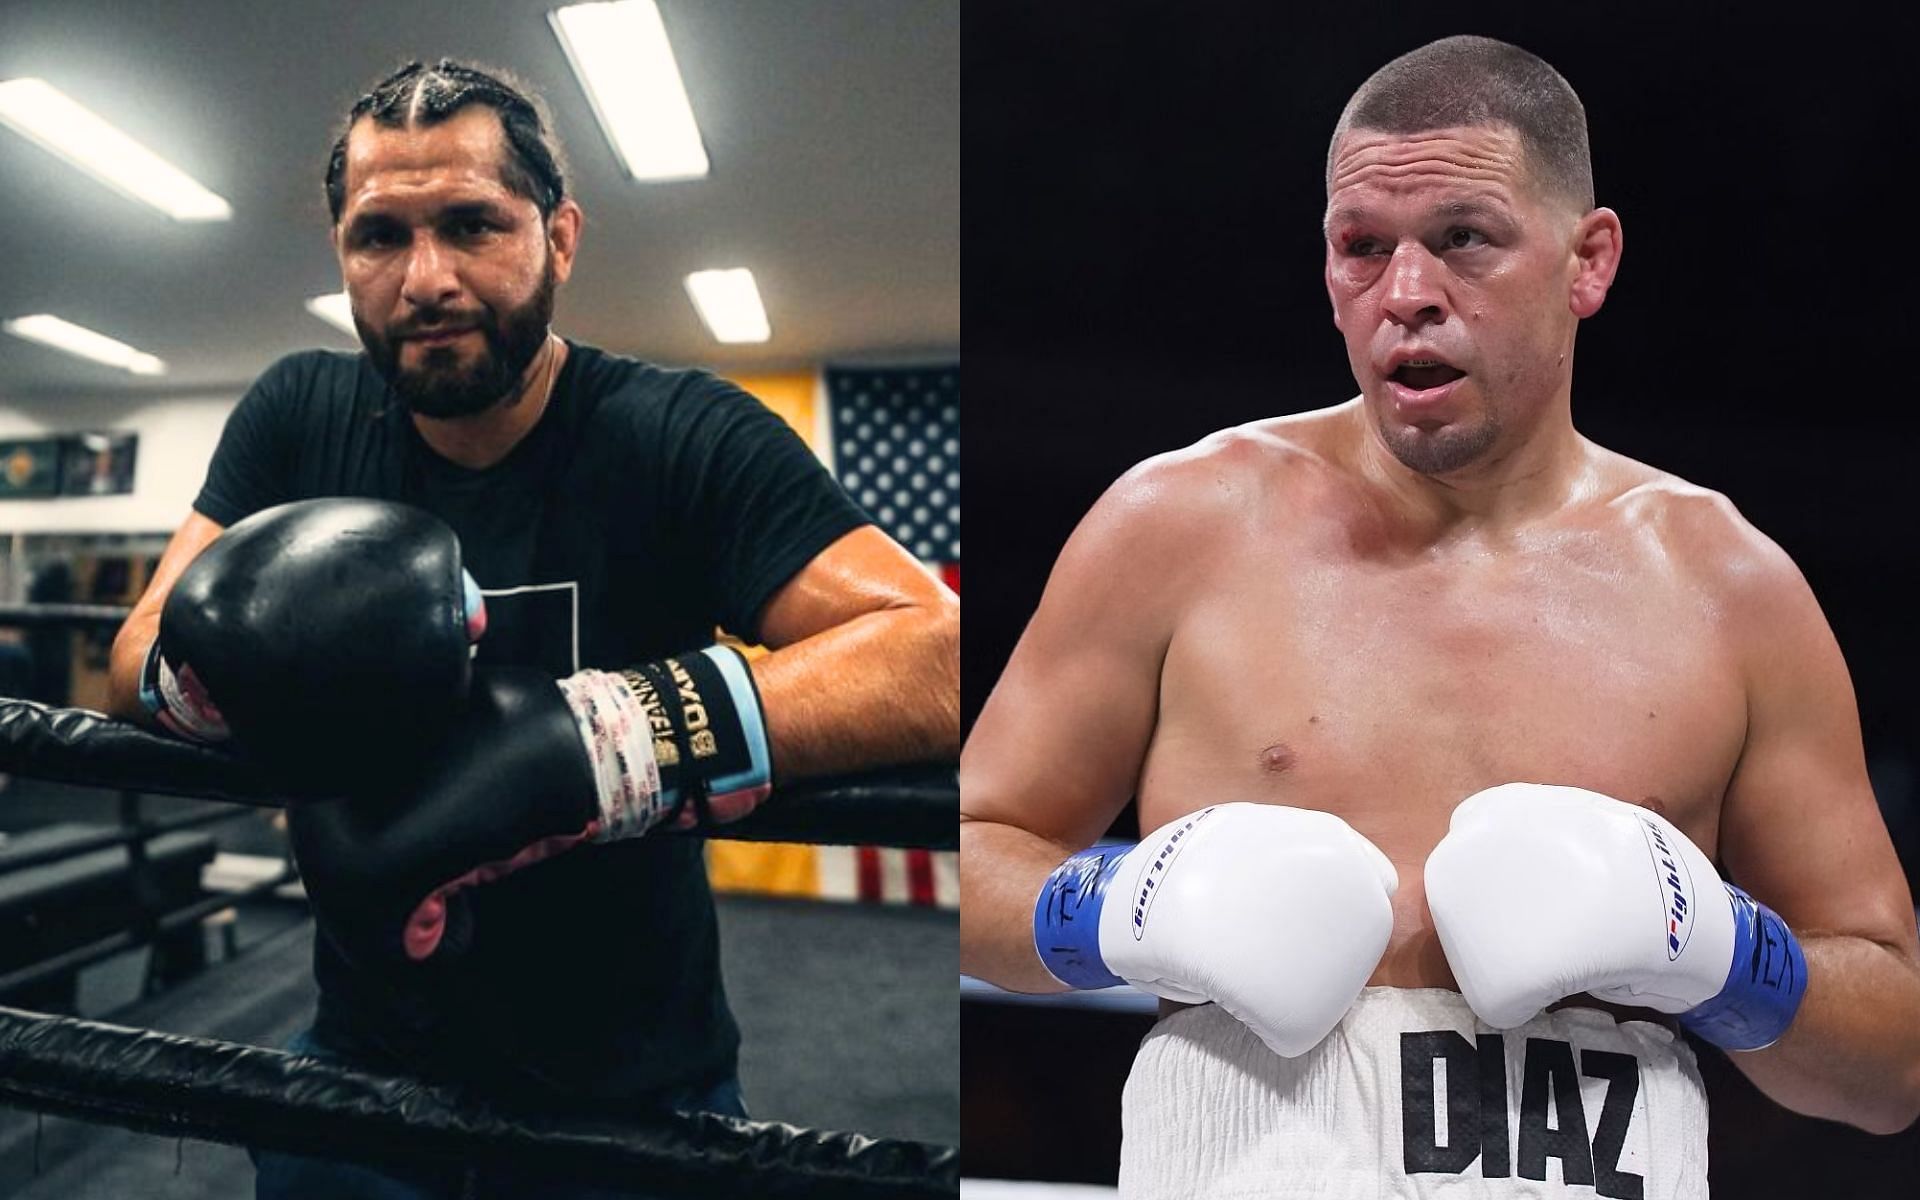 Jorge Masvidal (left) takes aim at Nate Diaz (right) for his list of demans ahead of their boxing match [Images Courtesy: @GettyImages, @gamebredfighter on Instagram]